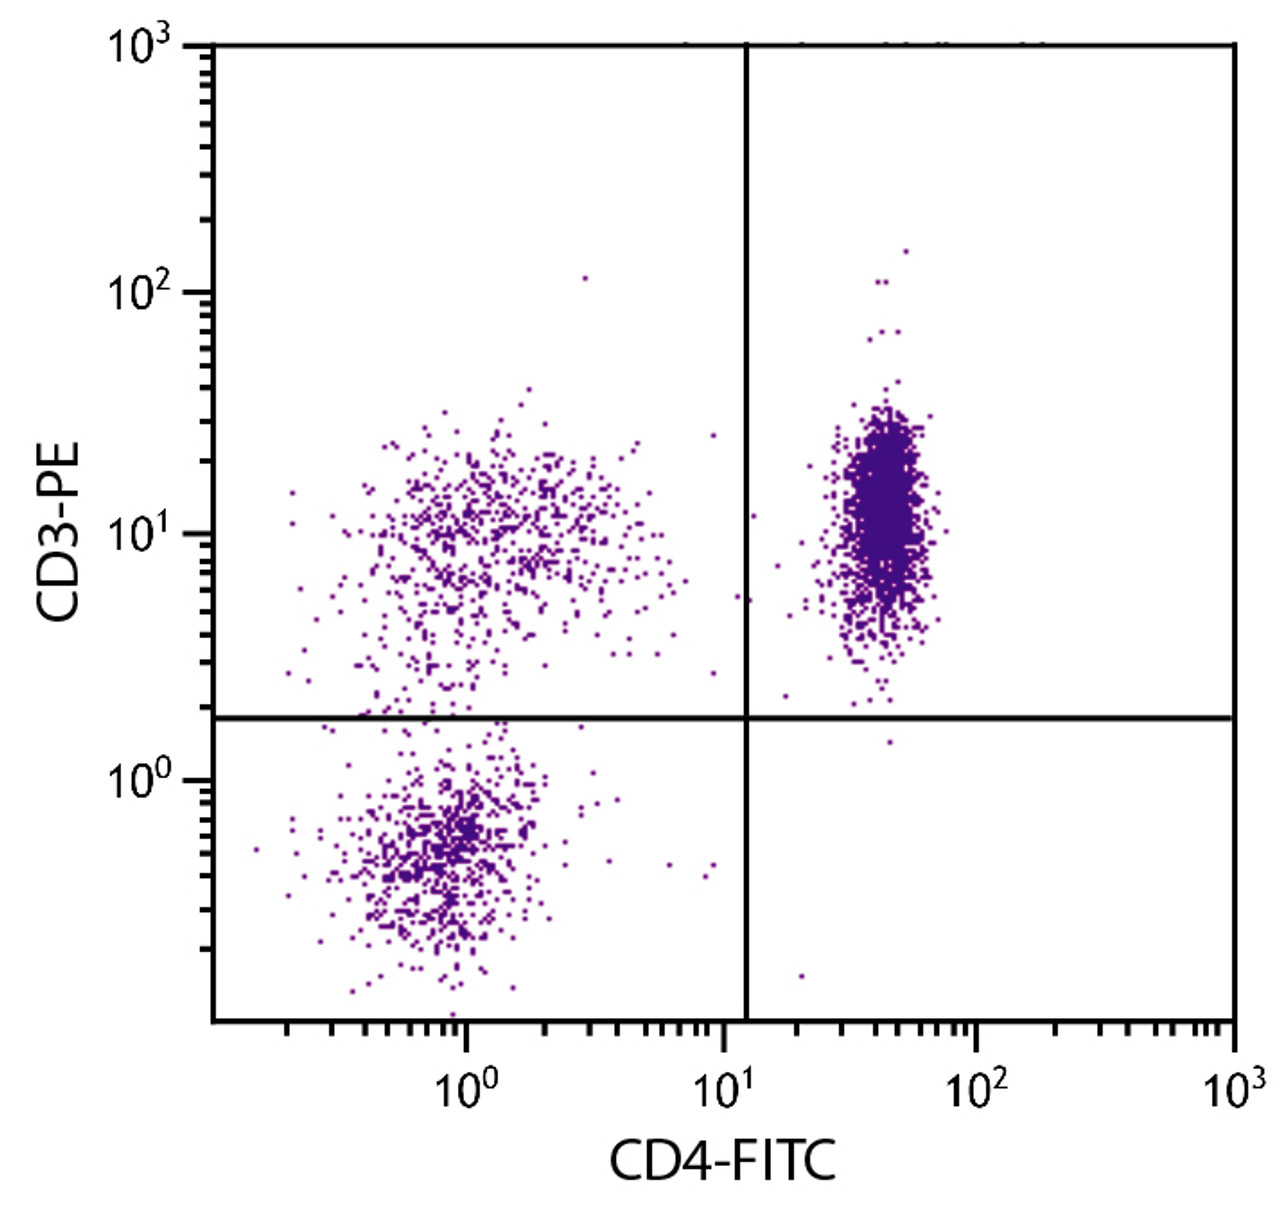 Chicken peripheral blood mononuclear cells were stained with Mouse Anti-Chicken CD4-FITC (Cat. No. 99-208) and Mouse Anti-Chicken CD3-PE .